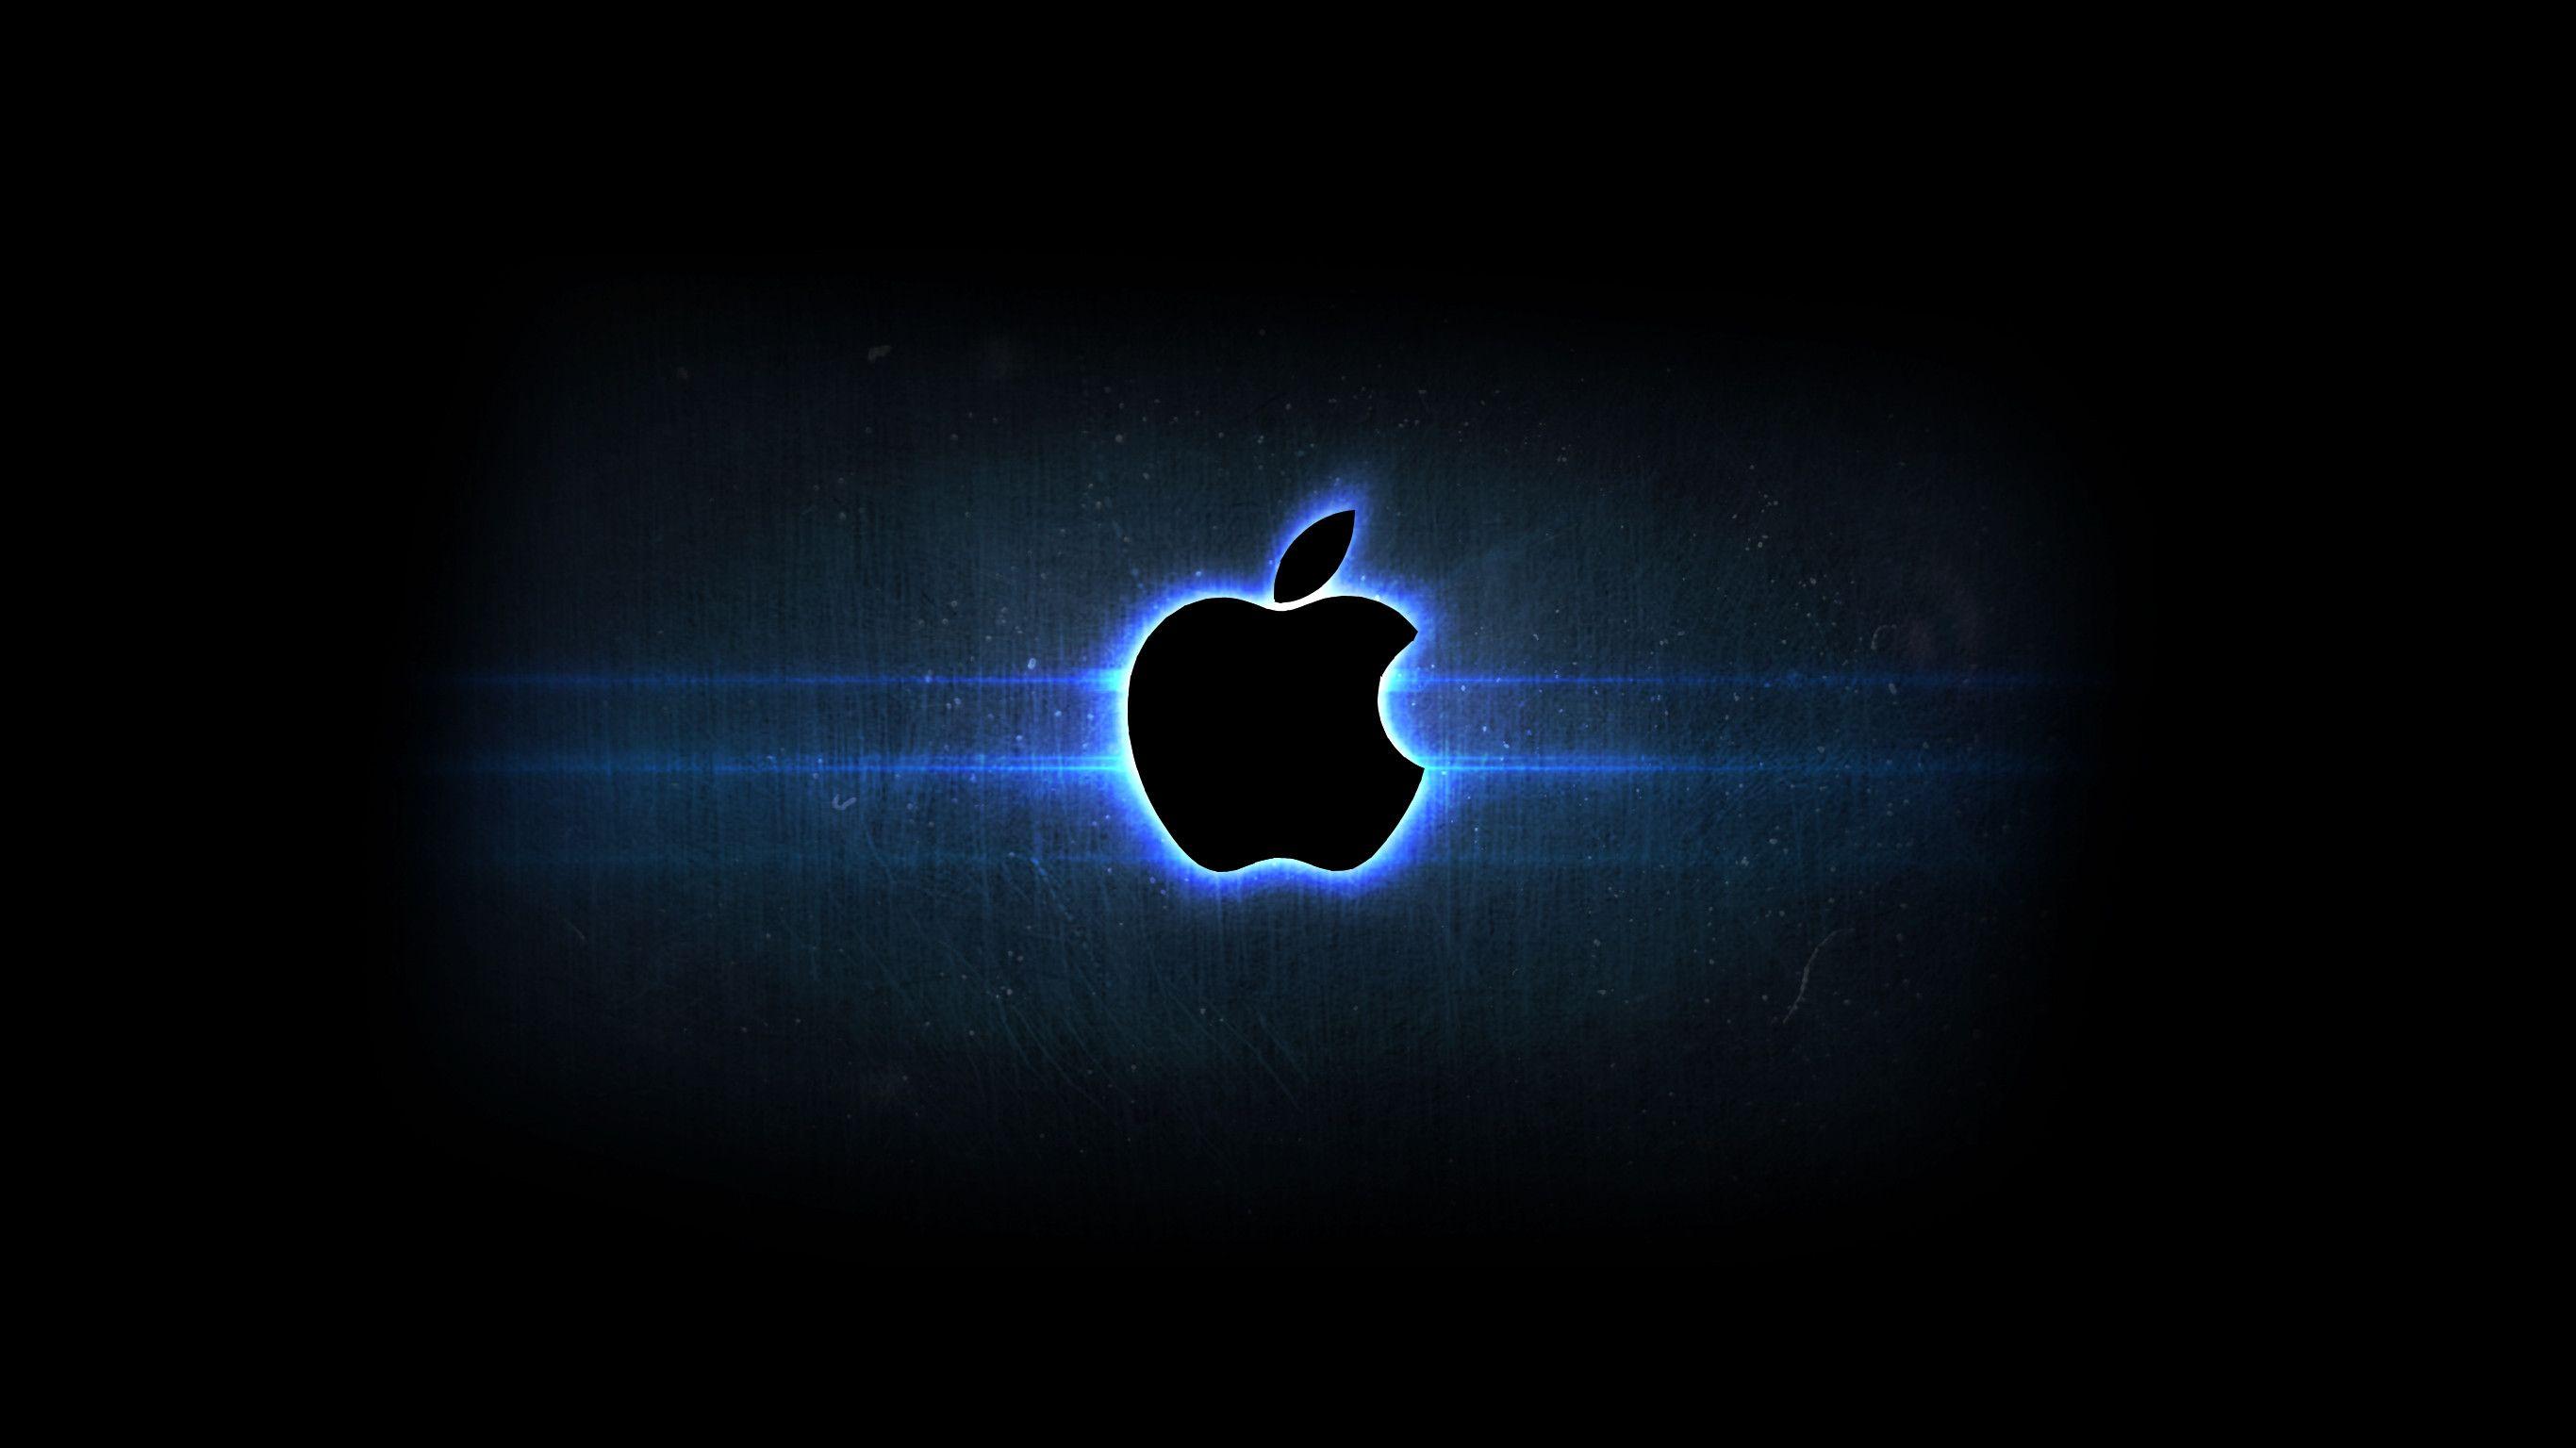 Apple Background Images - Wallpaper Cave